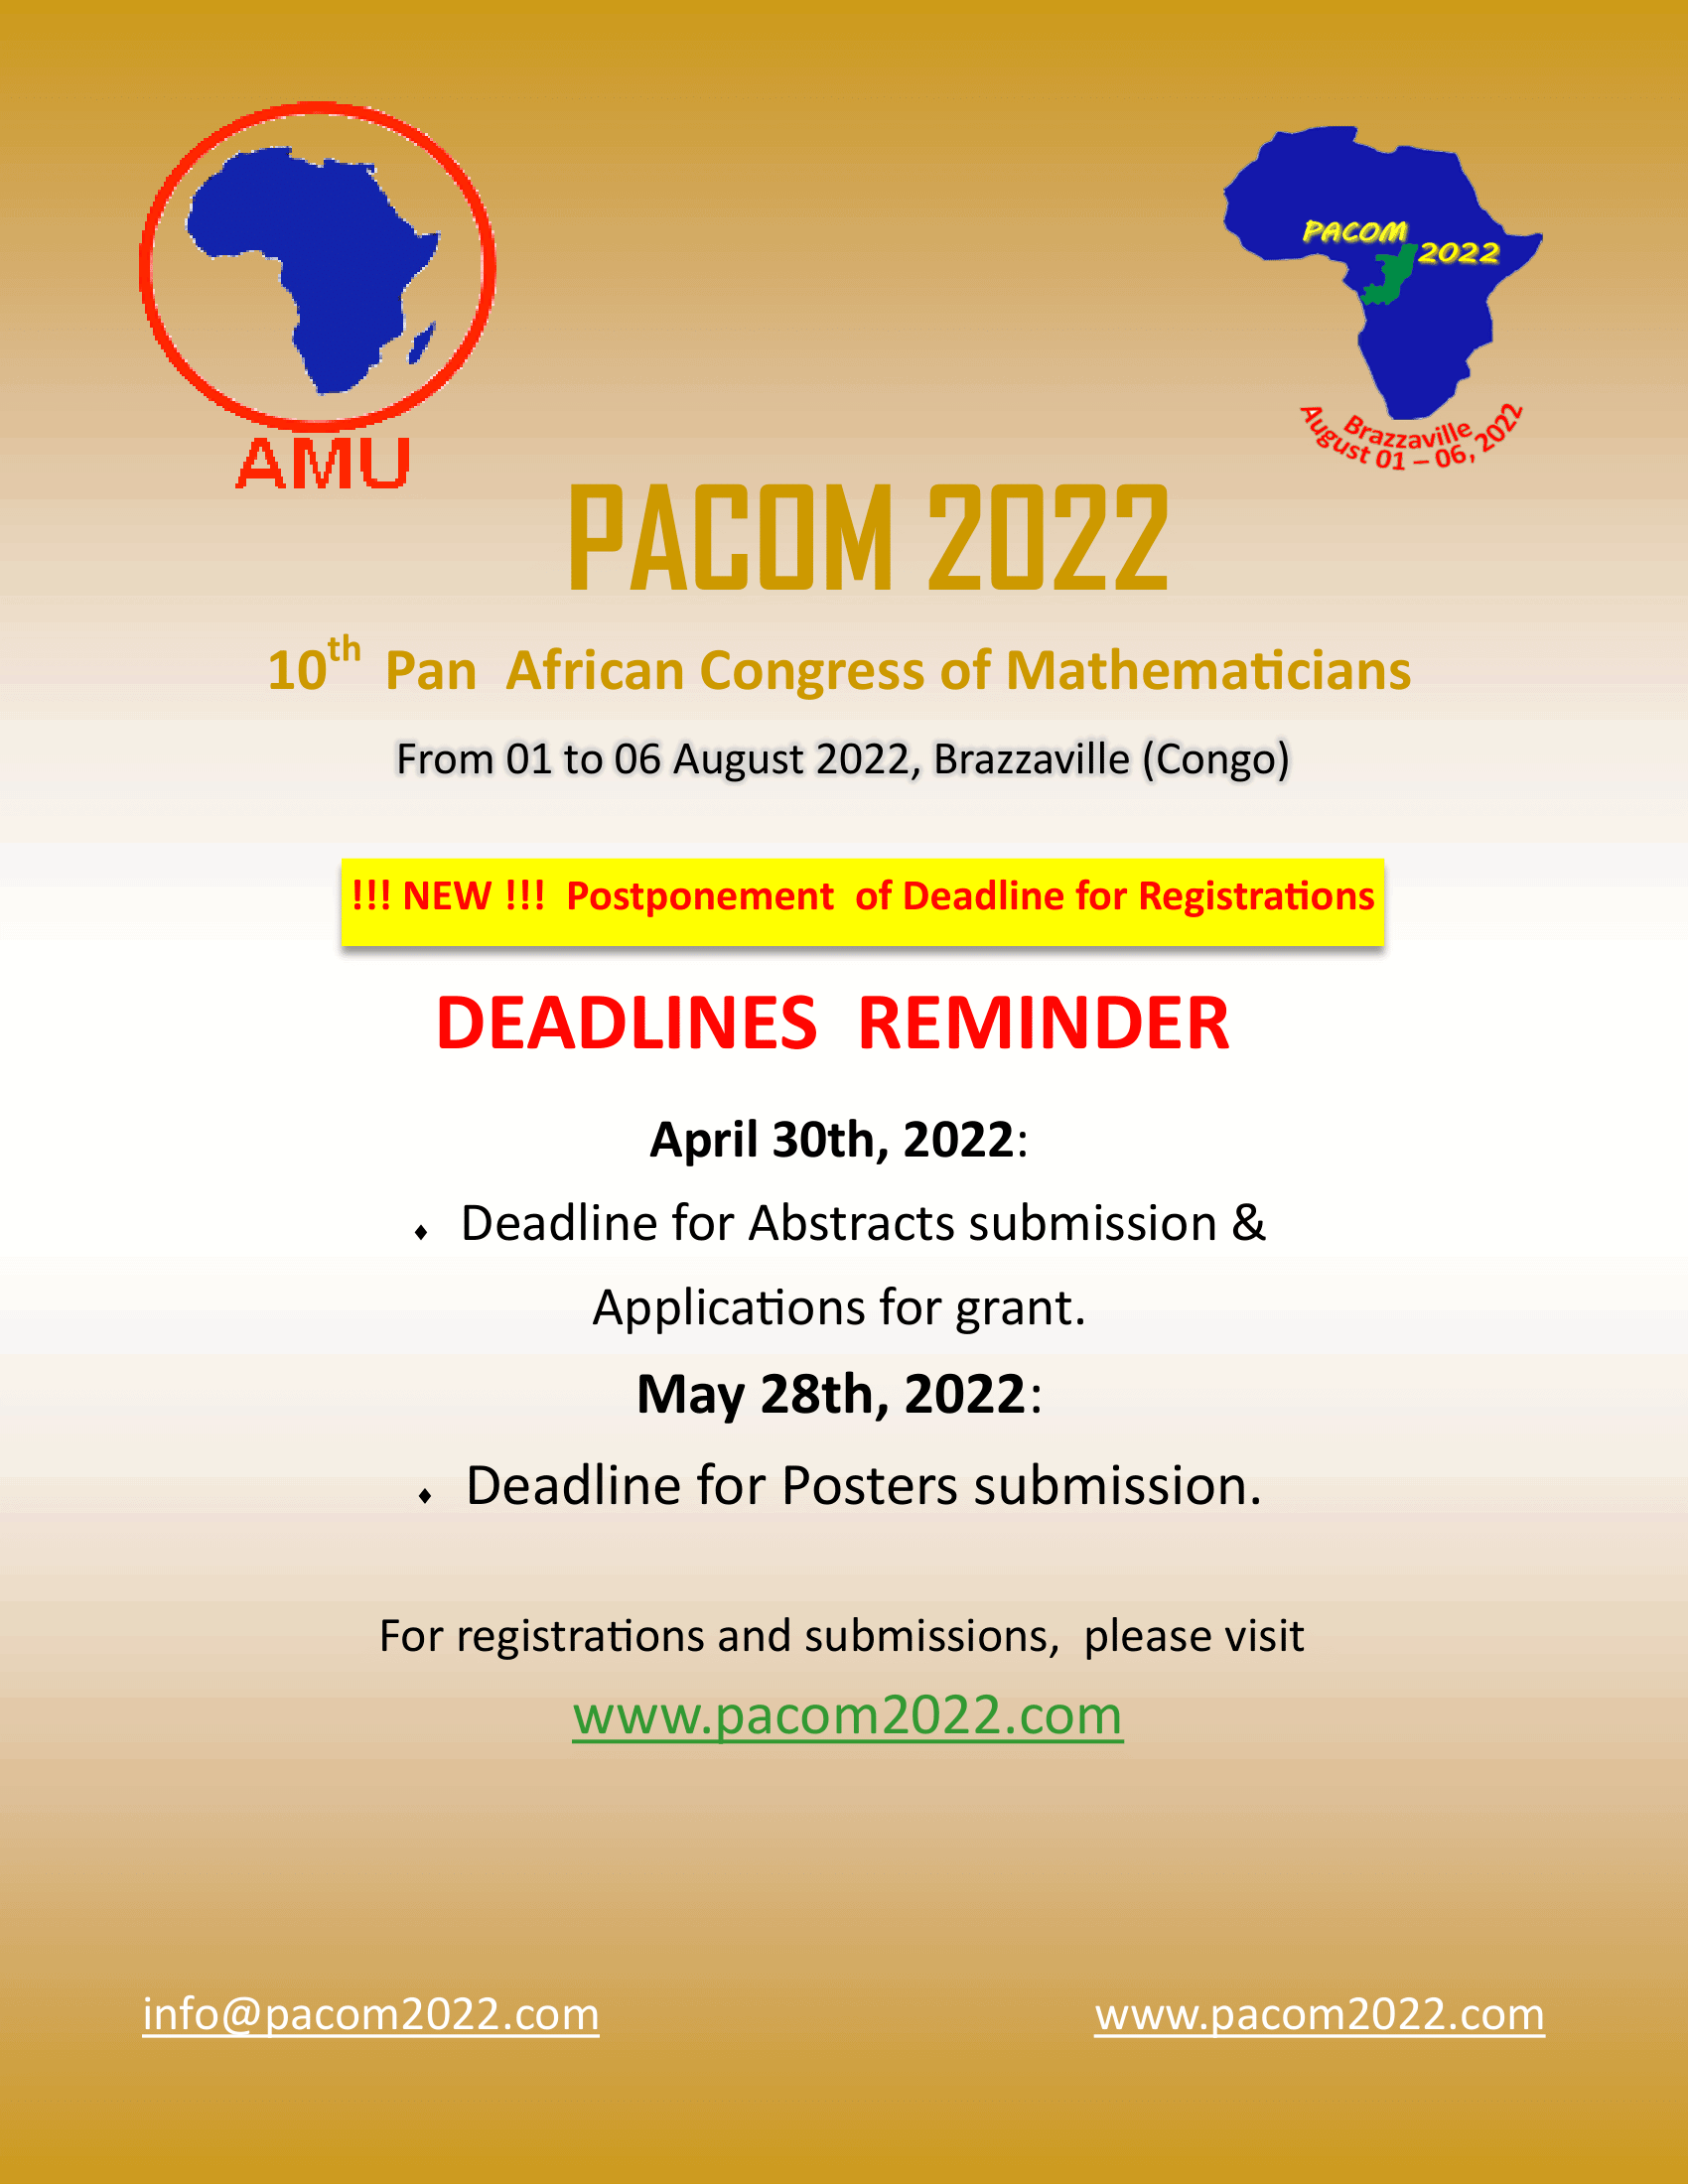 Postponement of Deadlines for Abstract submissions & Applications for grant